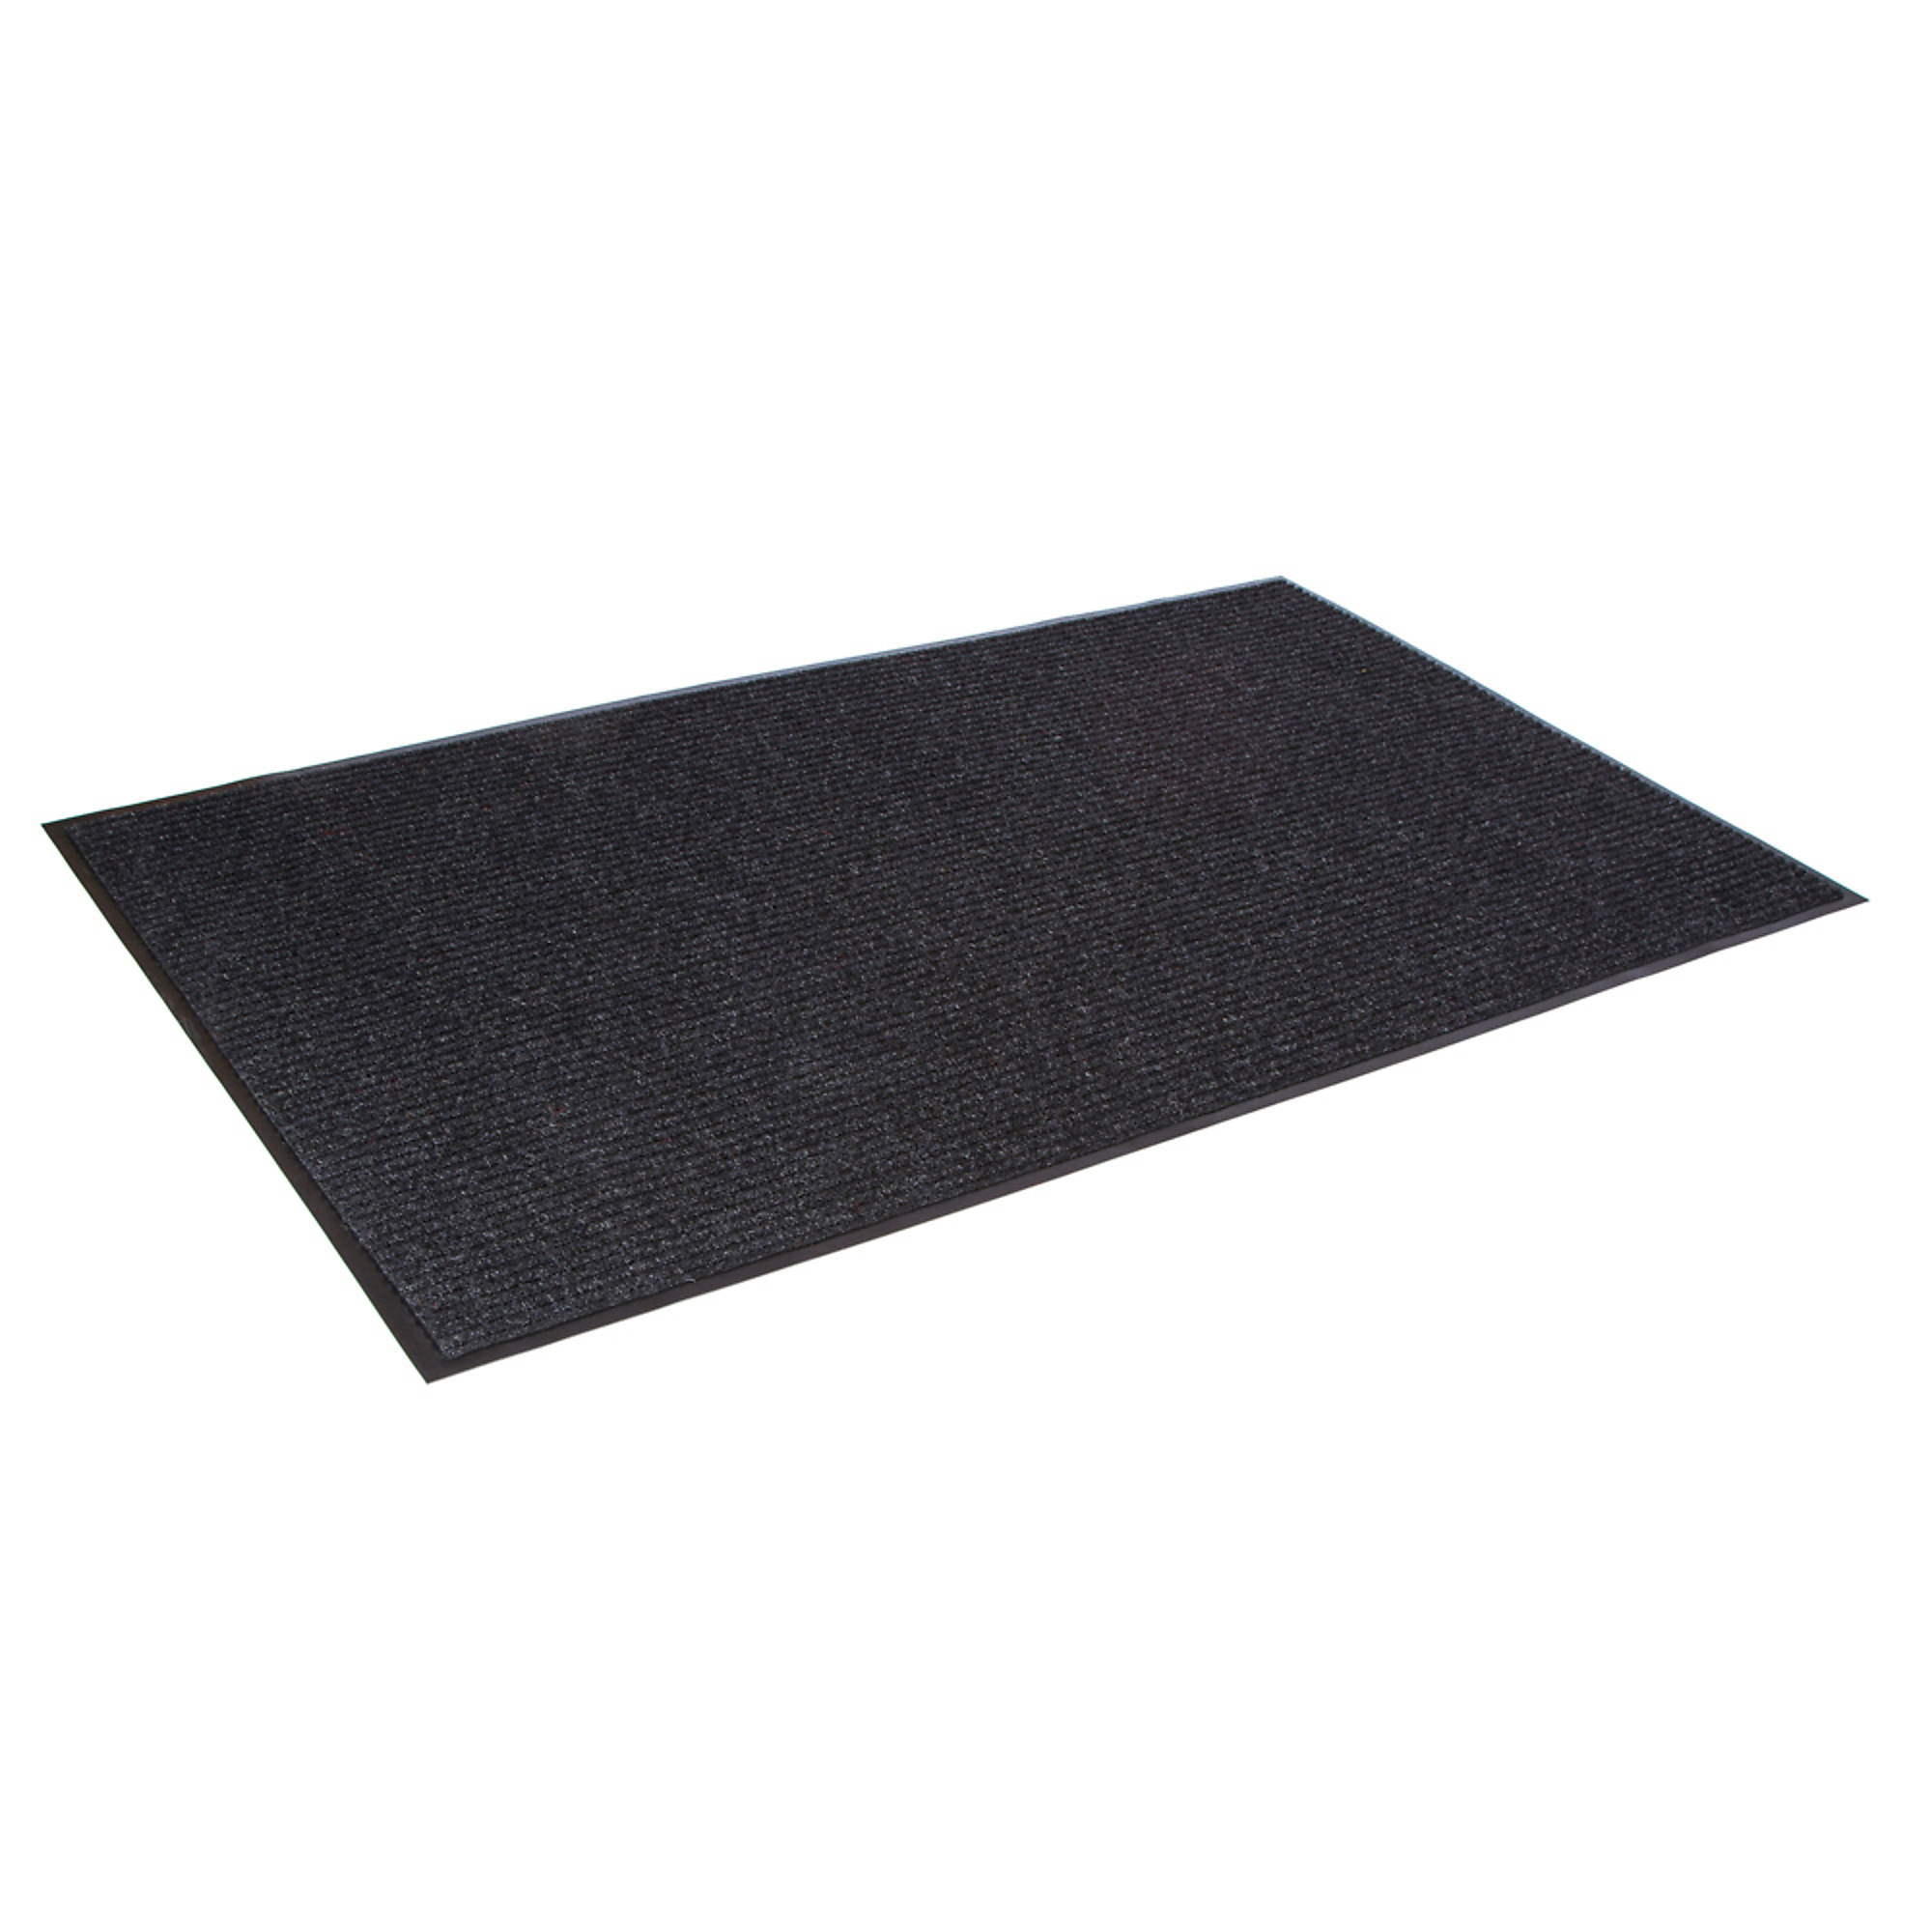 Crown Matting Technologies, Needle-Rib 3ft.x5ft. Charcoal, Width 36 in, Length 60 in, Thickness 5/16 in, Model NR 0035CH